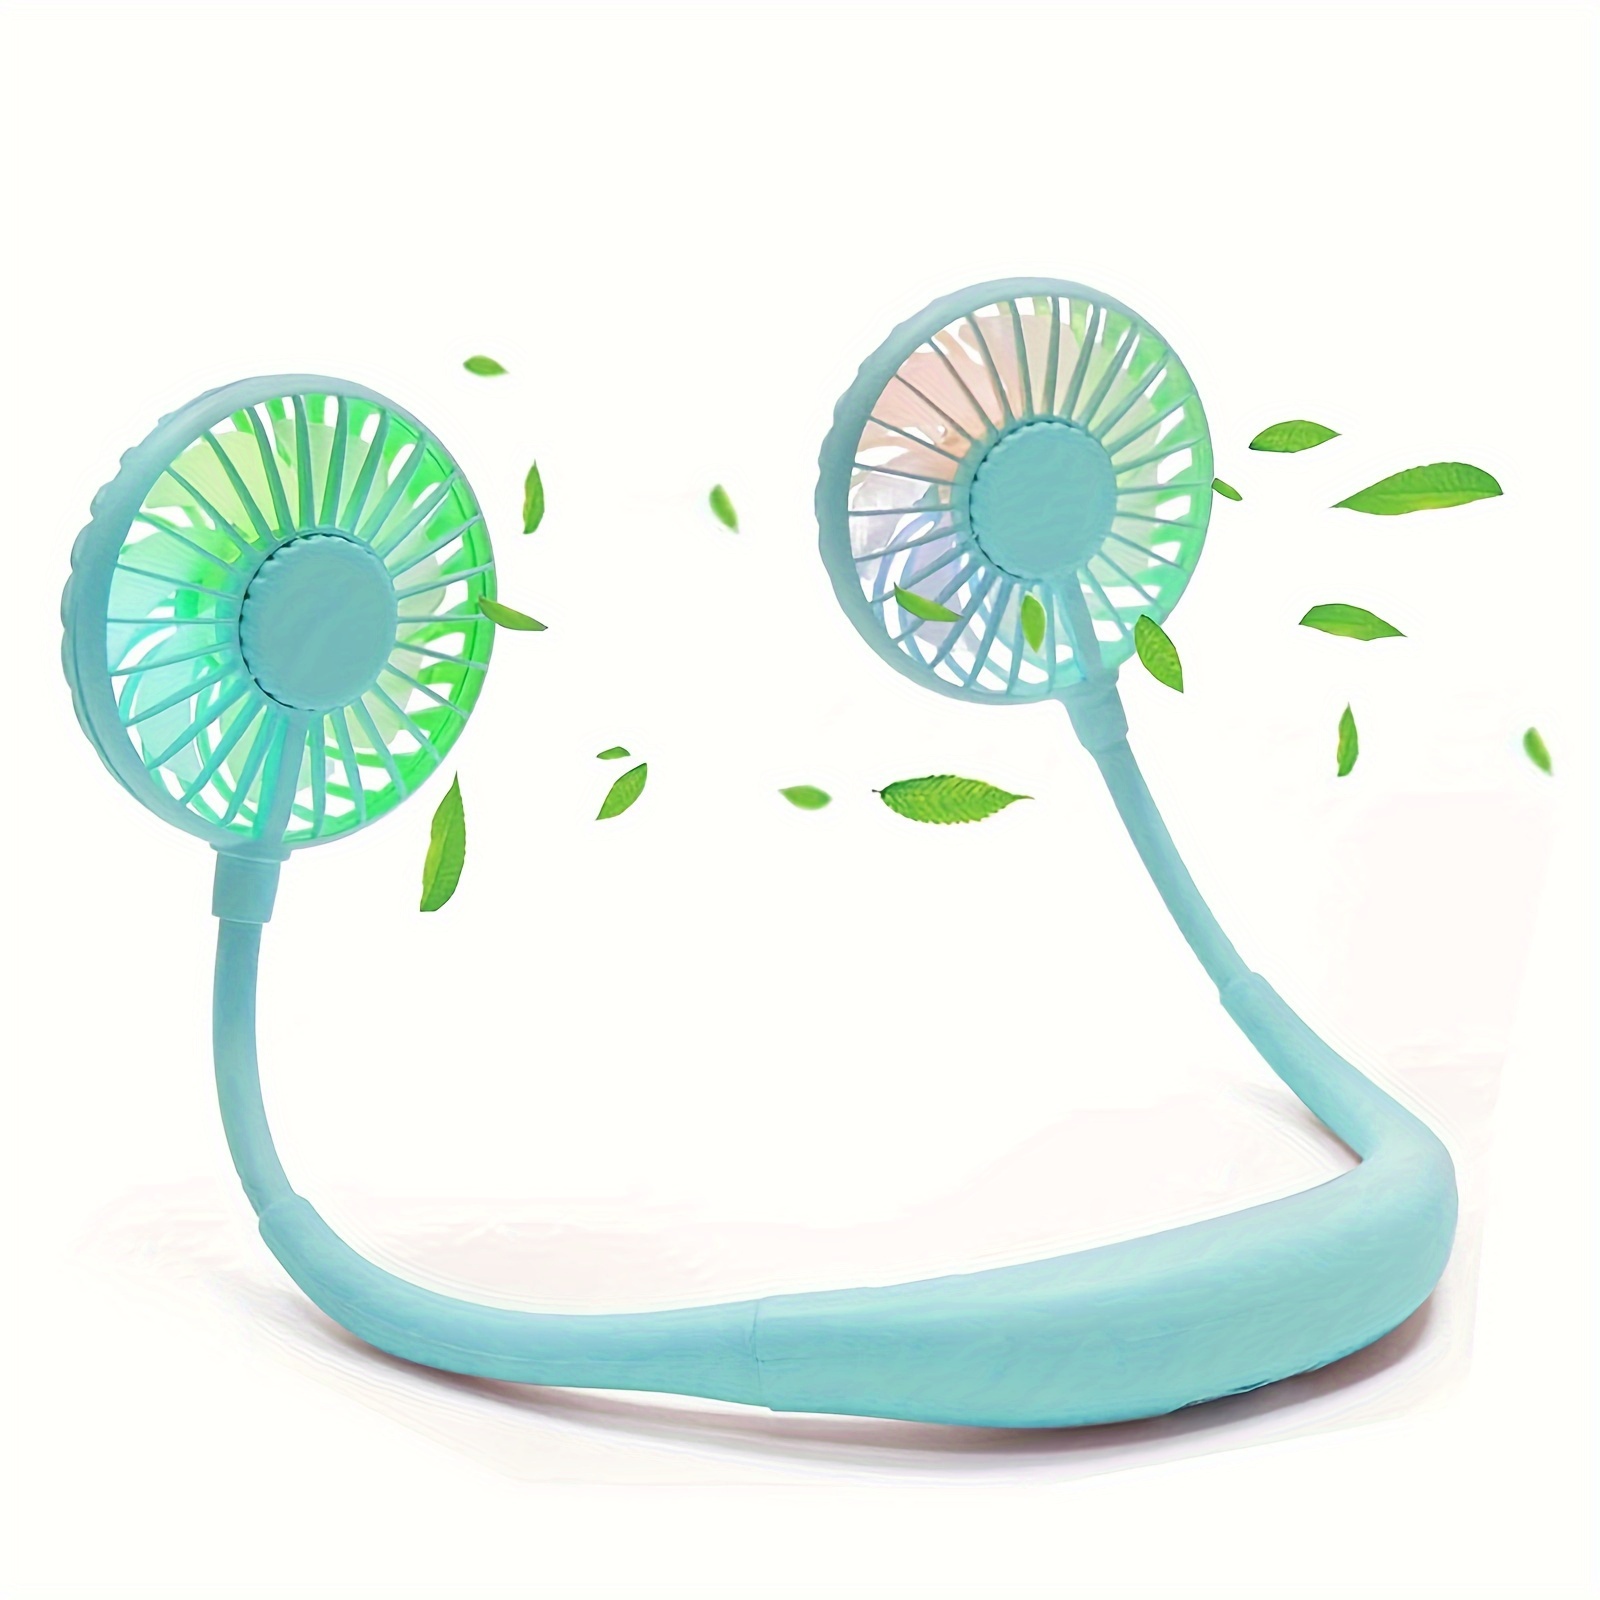 

Upgraded Version Portable Neck Fan, Color Changing Led, With Aromatherapy, 360° Free Rotation, And Lower Noise Strong Airflow Headphone Design For Sport, Office, Home, Outdoor, Travel, Gift